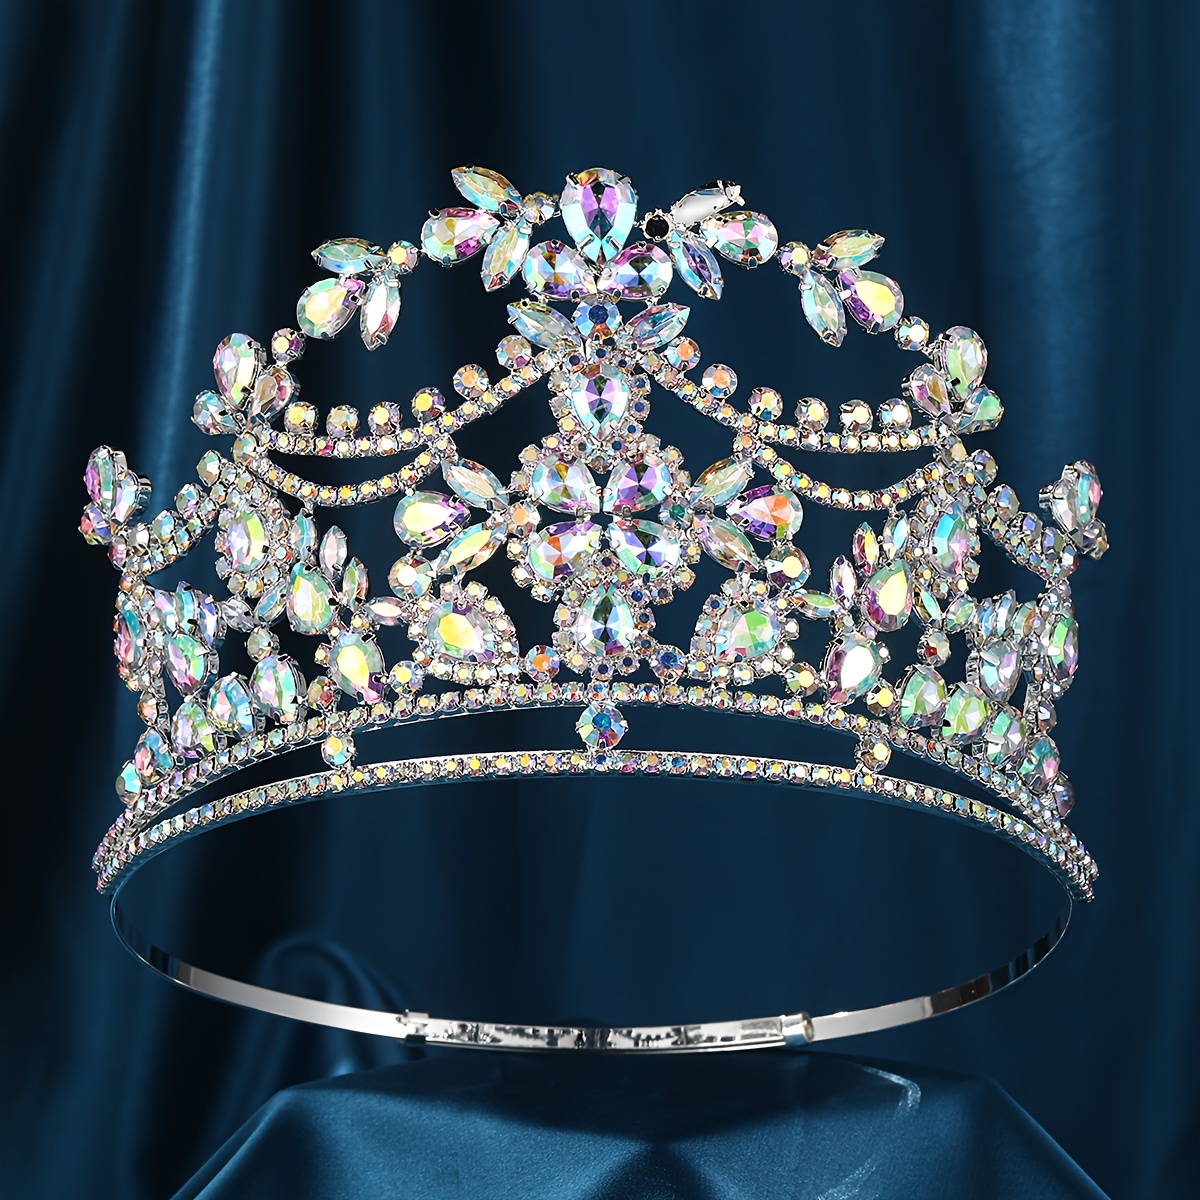 luxury imitation crystal beauty pageant crown miss world style tiara birthday party festival accessory fashion award ceremony large crown bridal headpiece queens regalia for celebrations